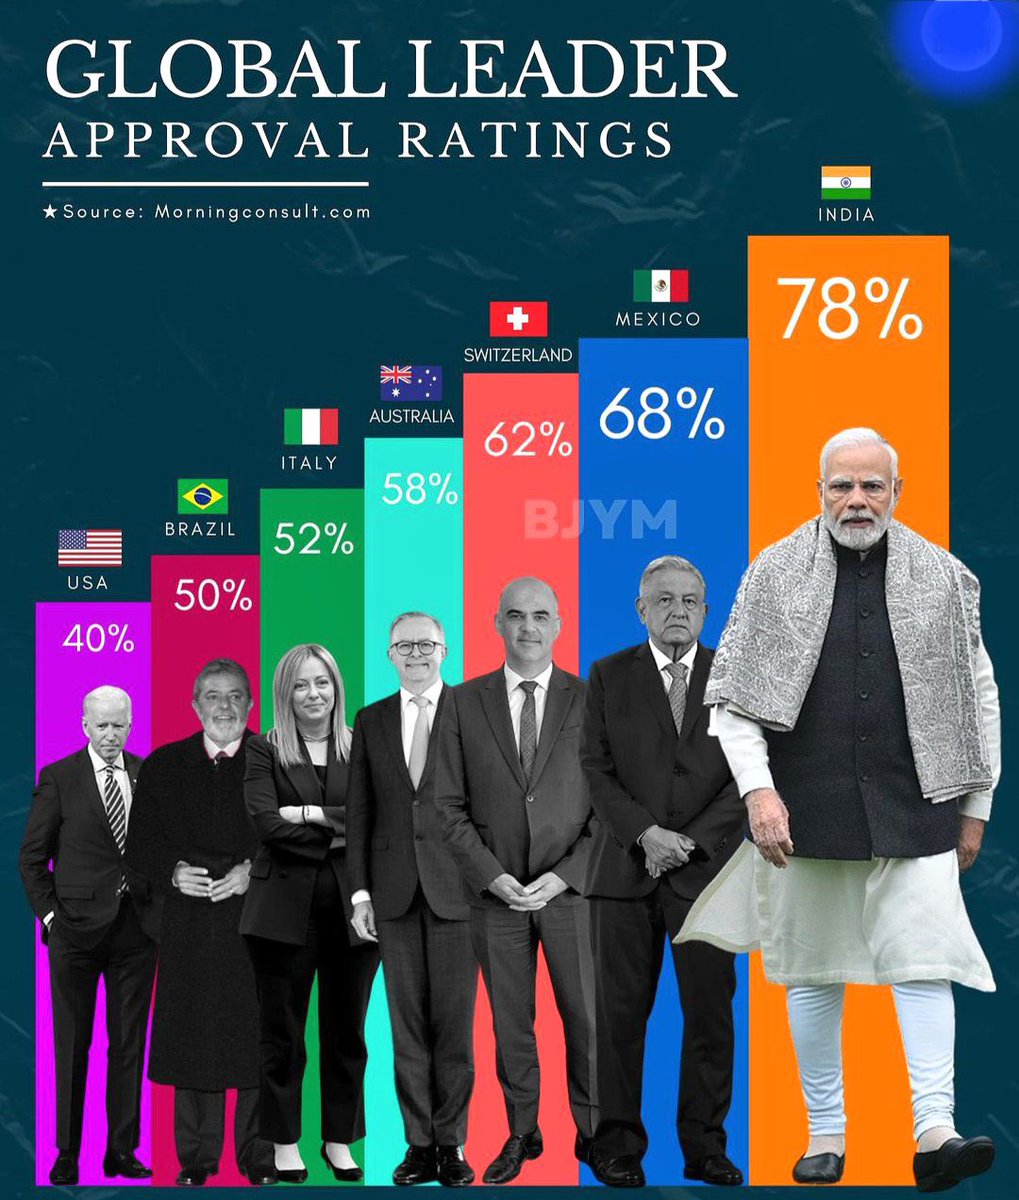 And it’s Modi again! Become World’s ‘Most Popular’ Leader